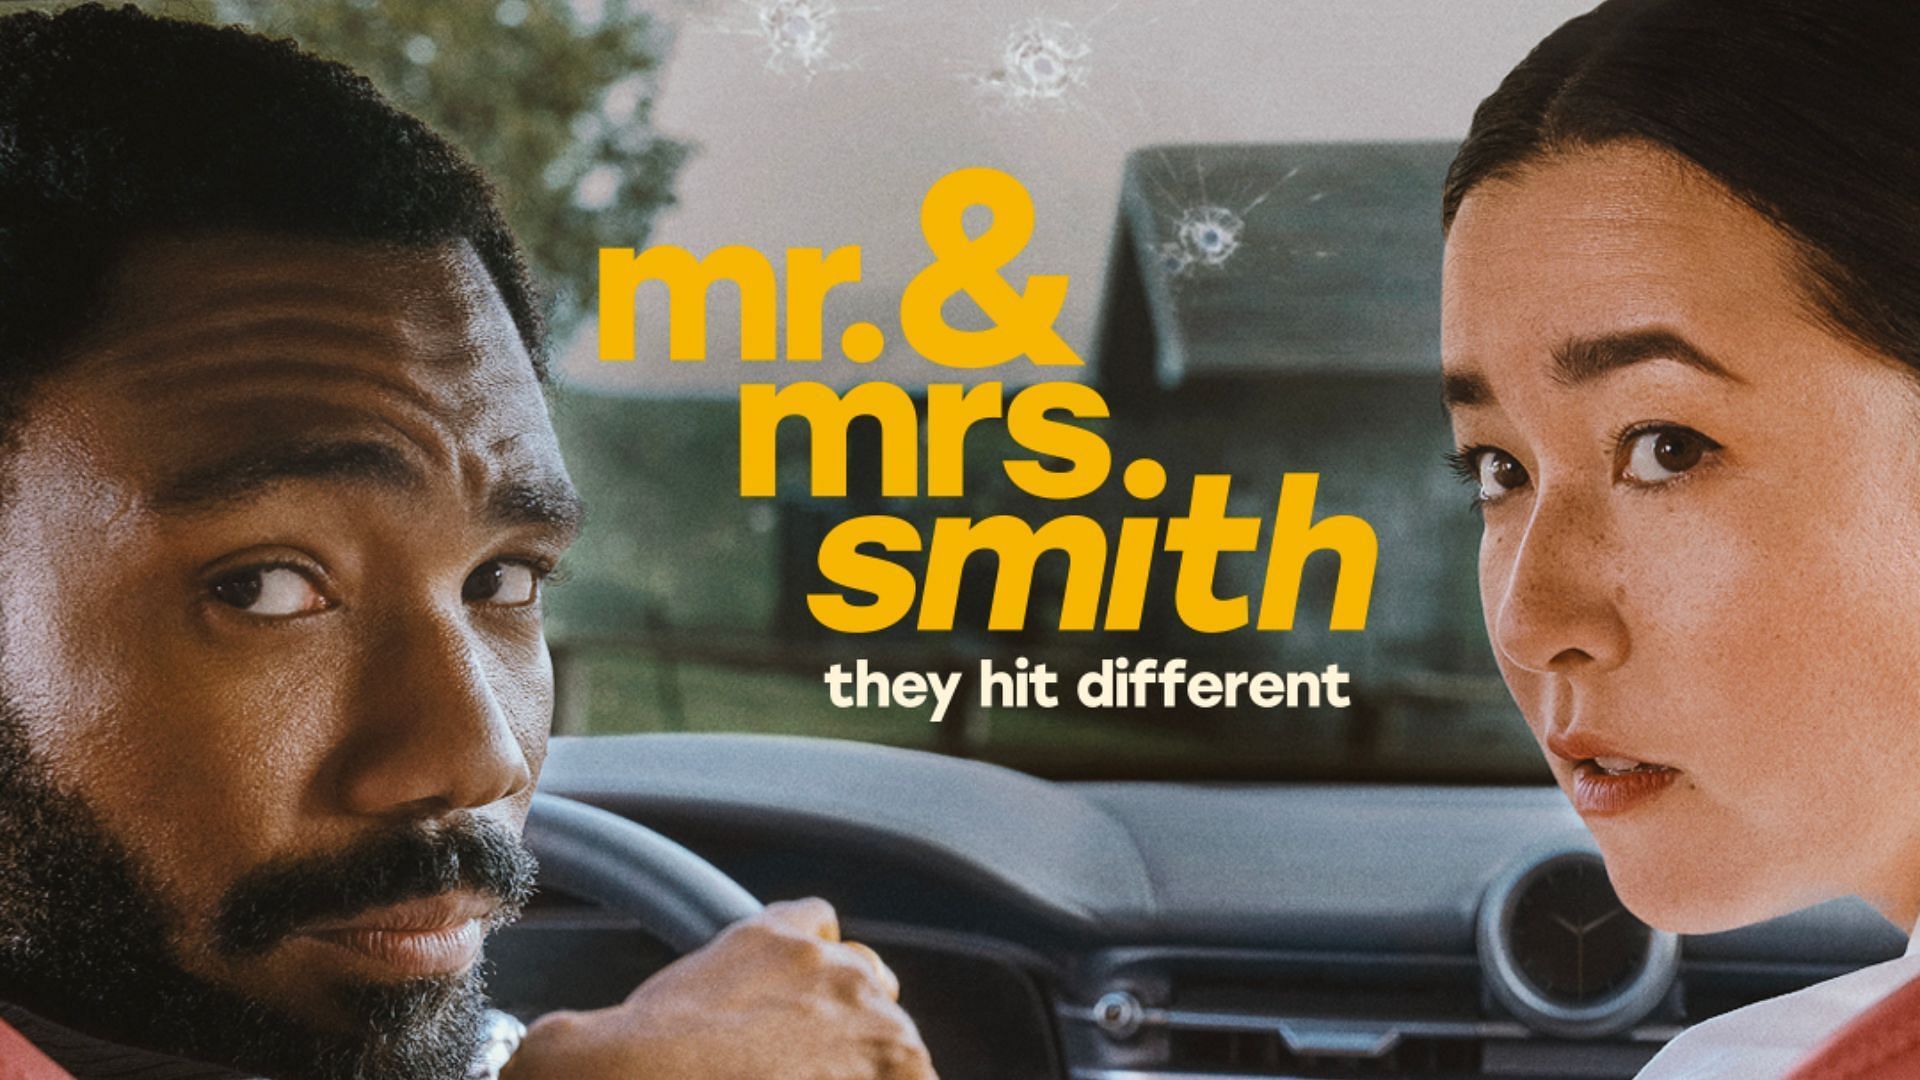 Mr. &amp; Mrs. Smith is a spy comedy that premiered on February 2, 2024 (Image via Amazon Prime)